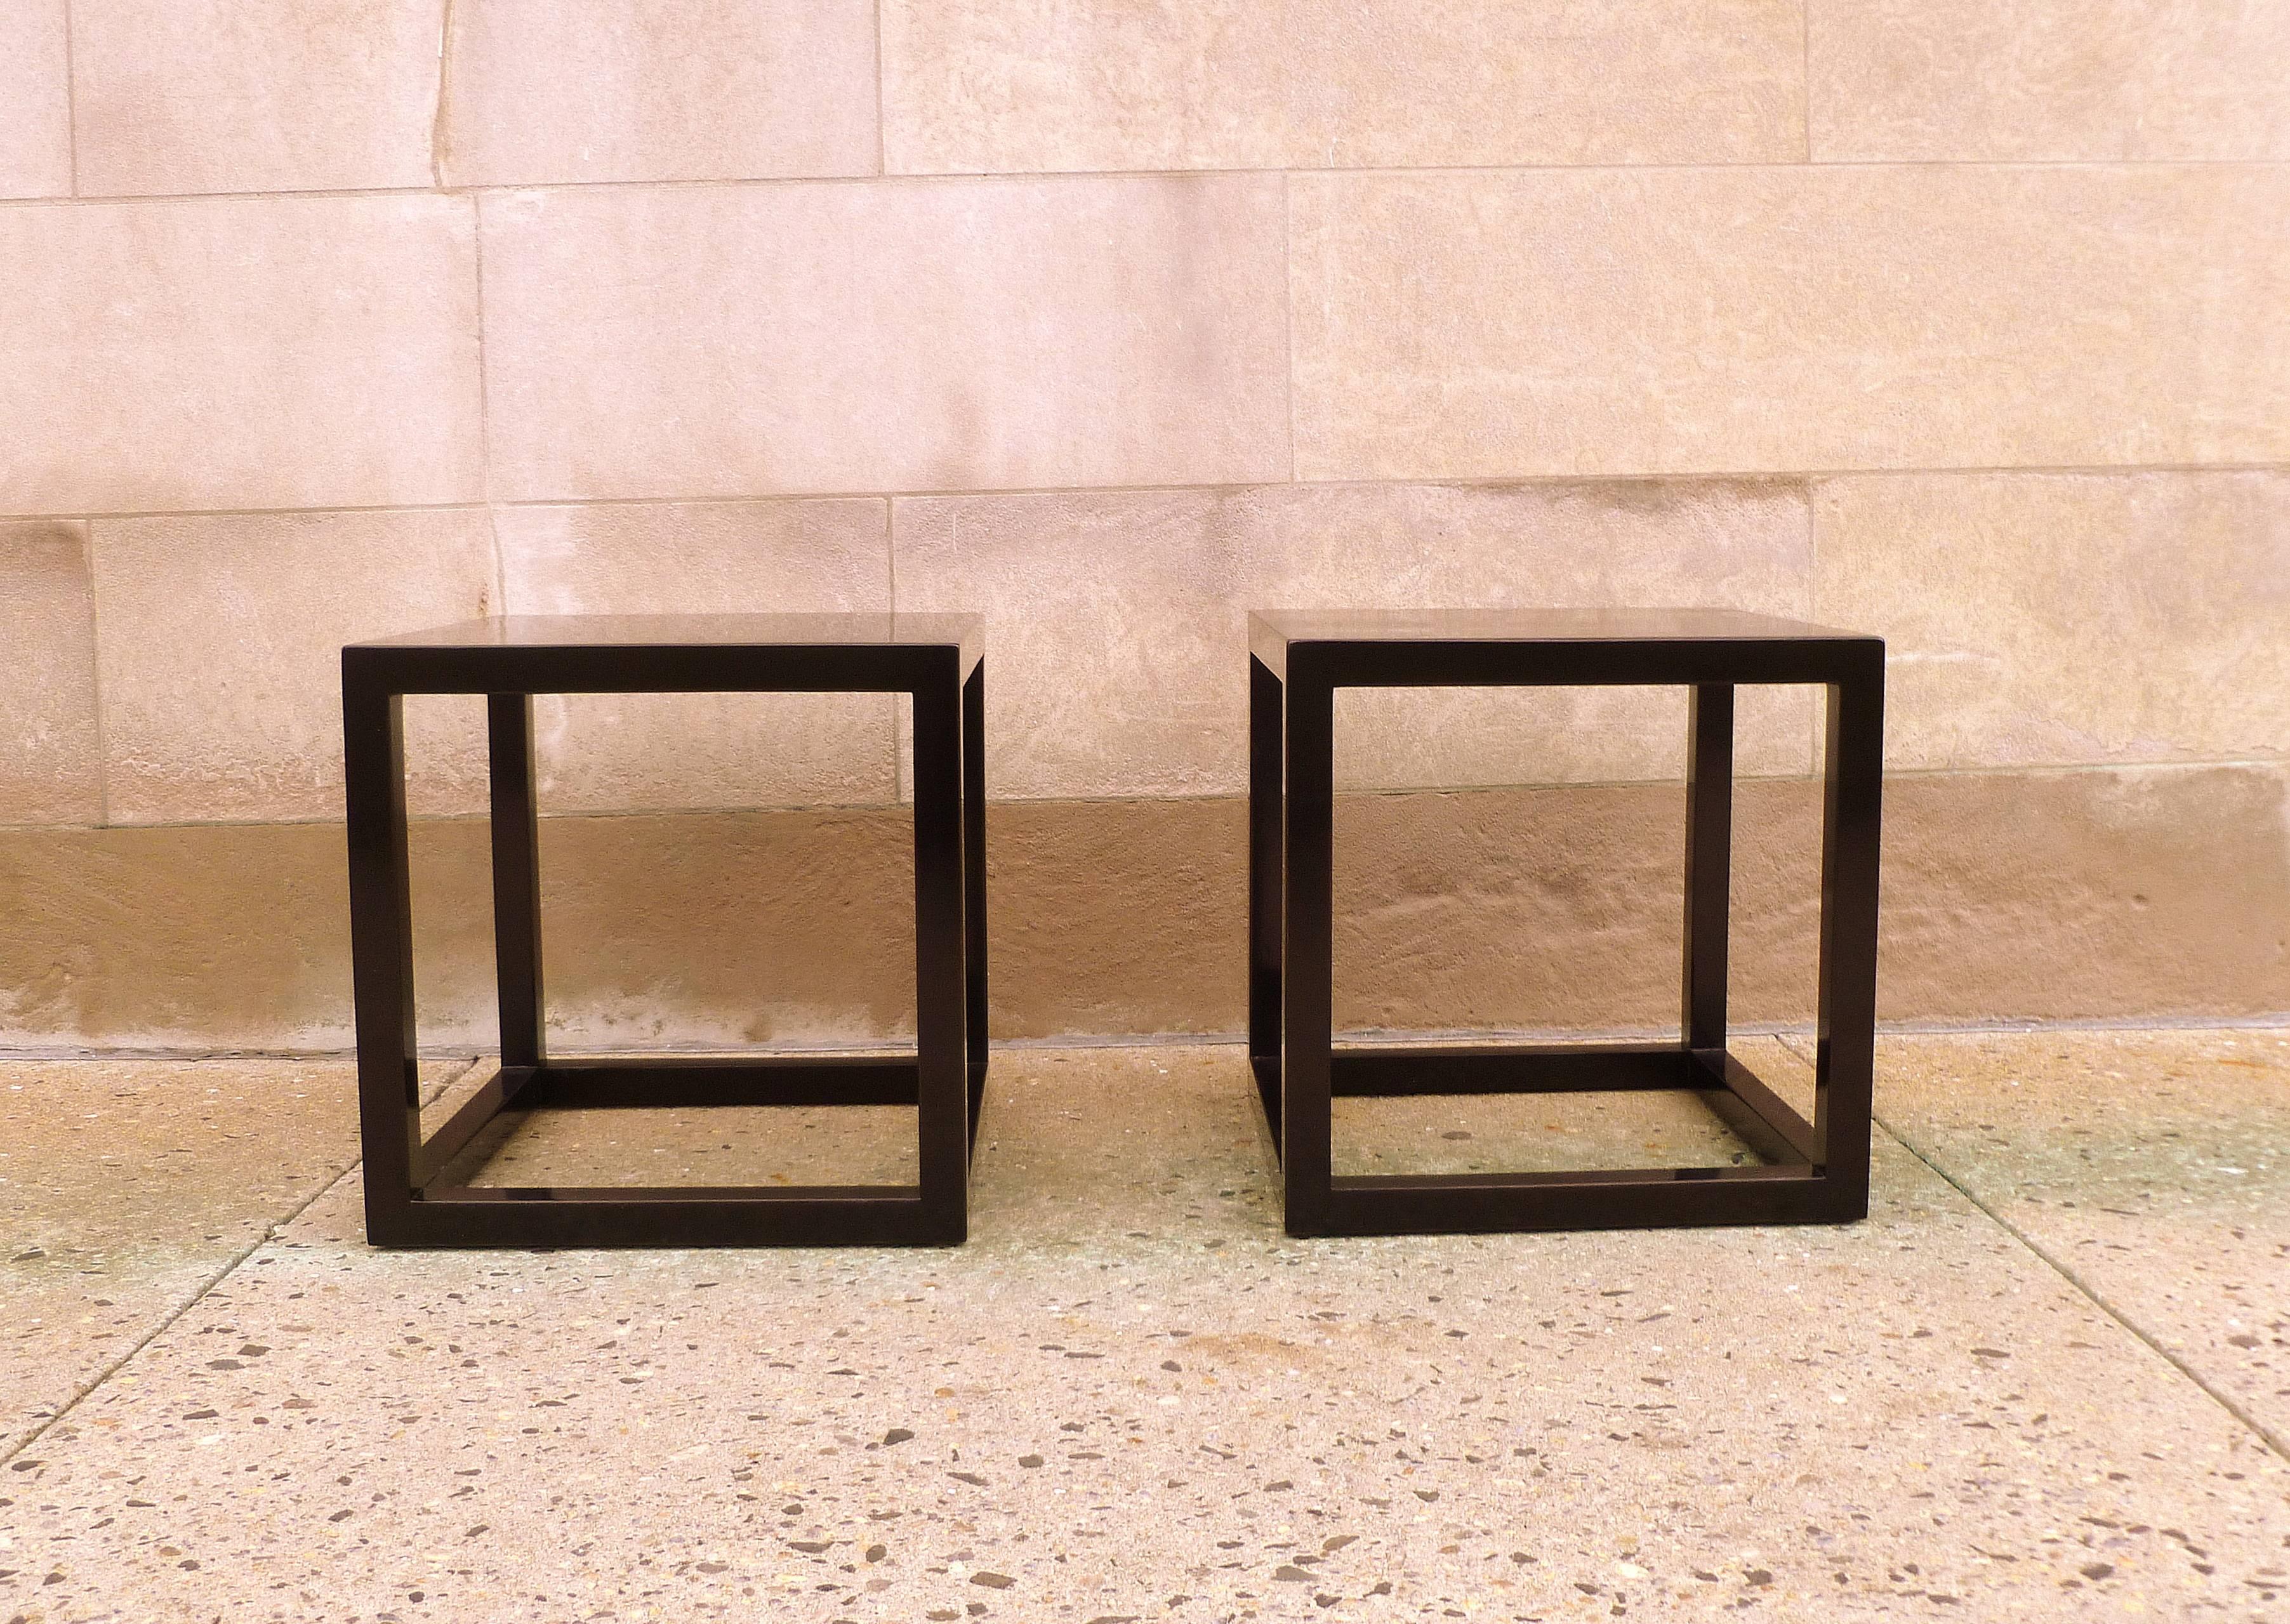 Fine black lacquer end tables. Simple and elegant form. Beautiful color and form. We carry fine quality furniture with elegant finished and has been appeared many times in 